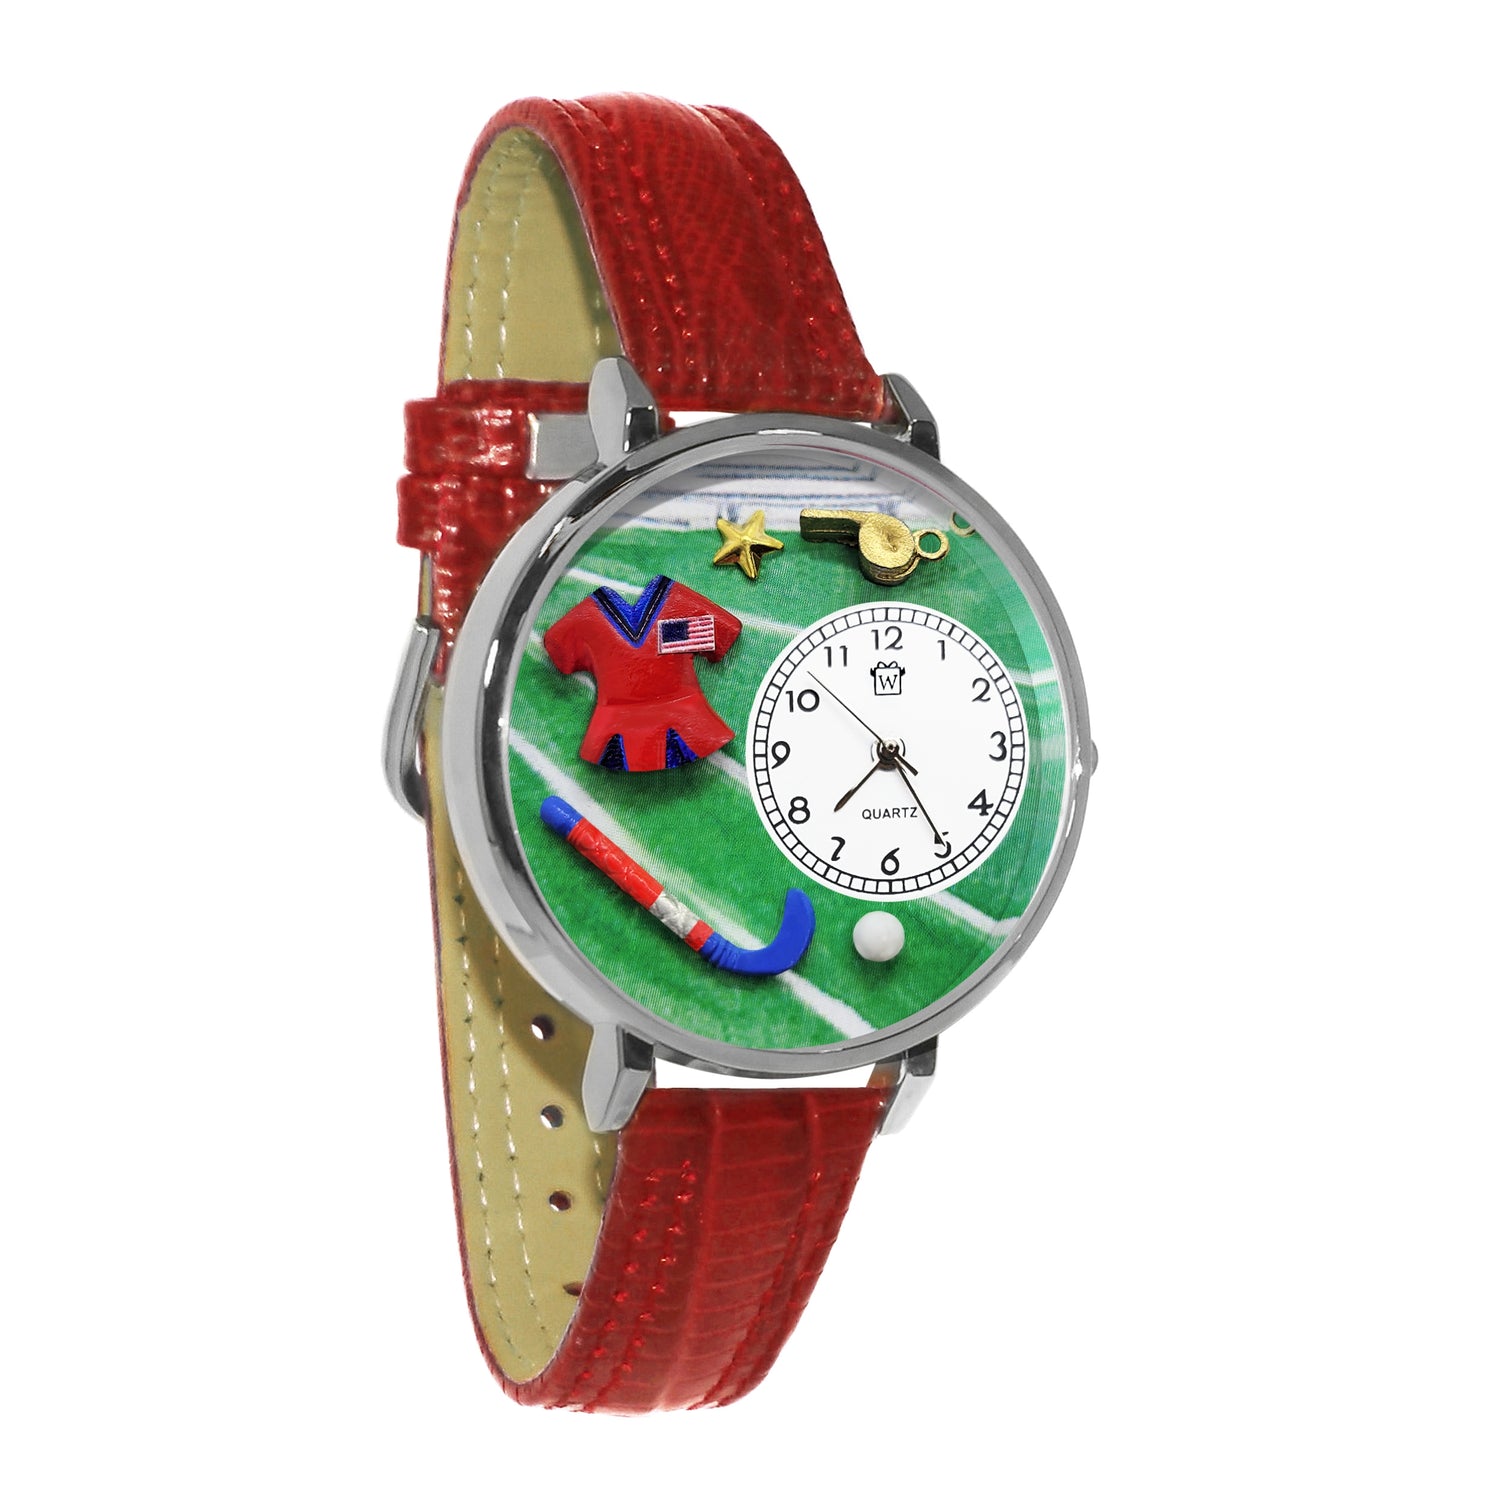 Whimsical Gifts | Field Hockey 3D Watch Large Style | Handmade in USA | Hobbies & Special Interests | Sports | Novelty Unique Fun Miniatures Gift | Silver Finish Red Leather Watch Band